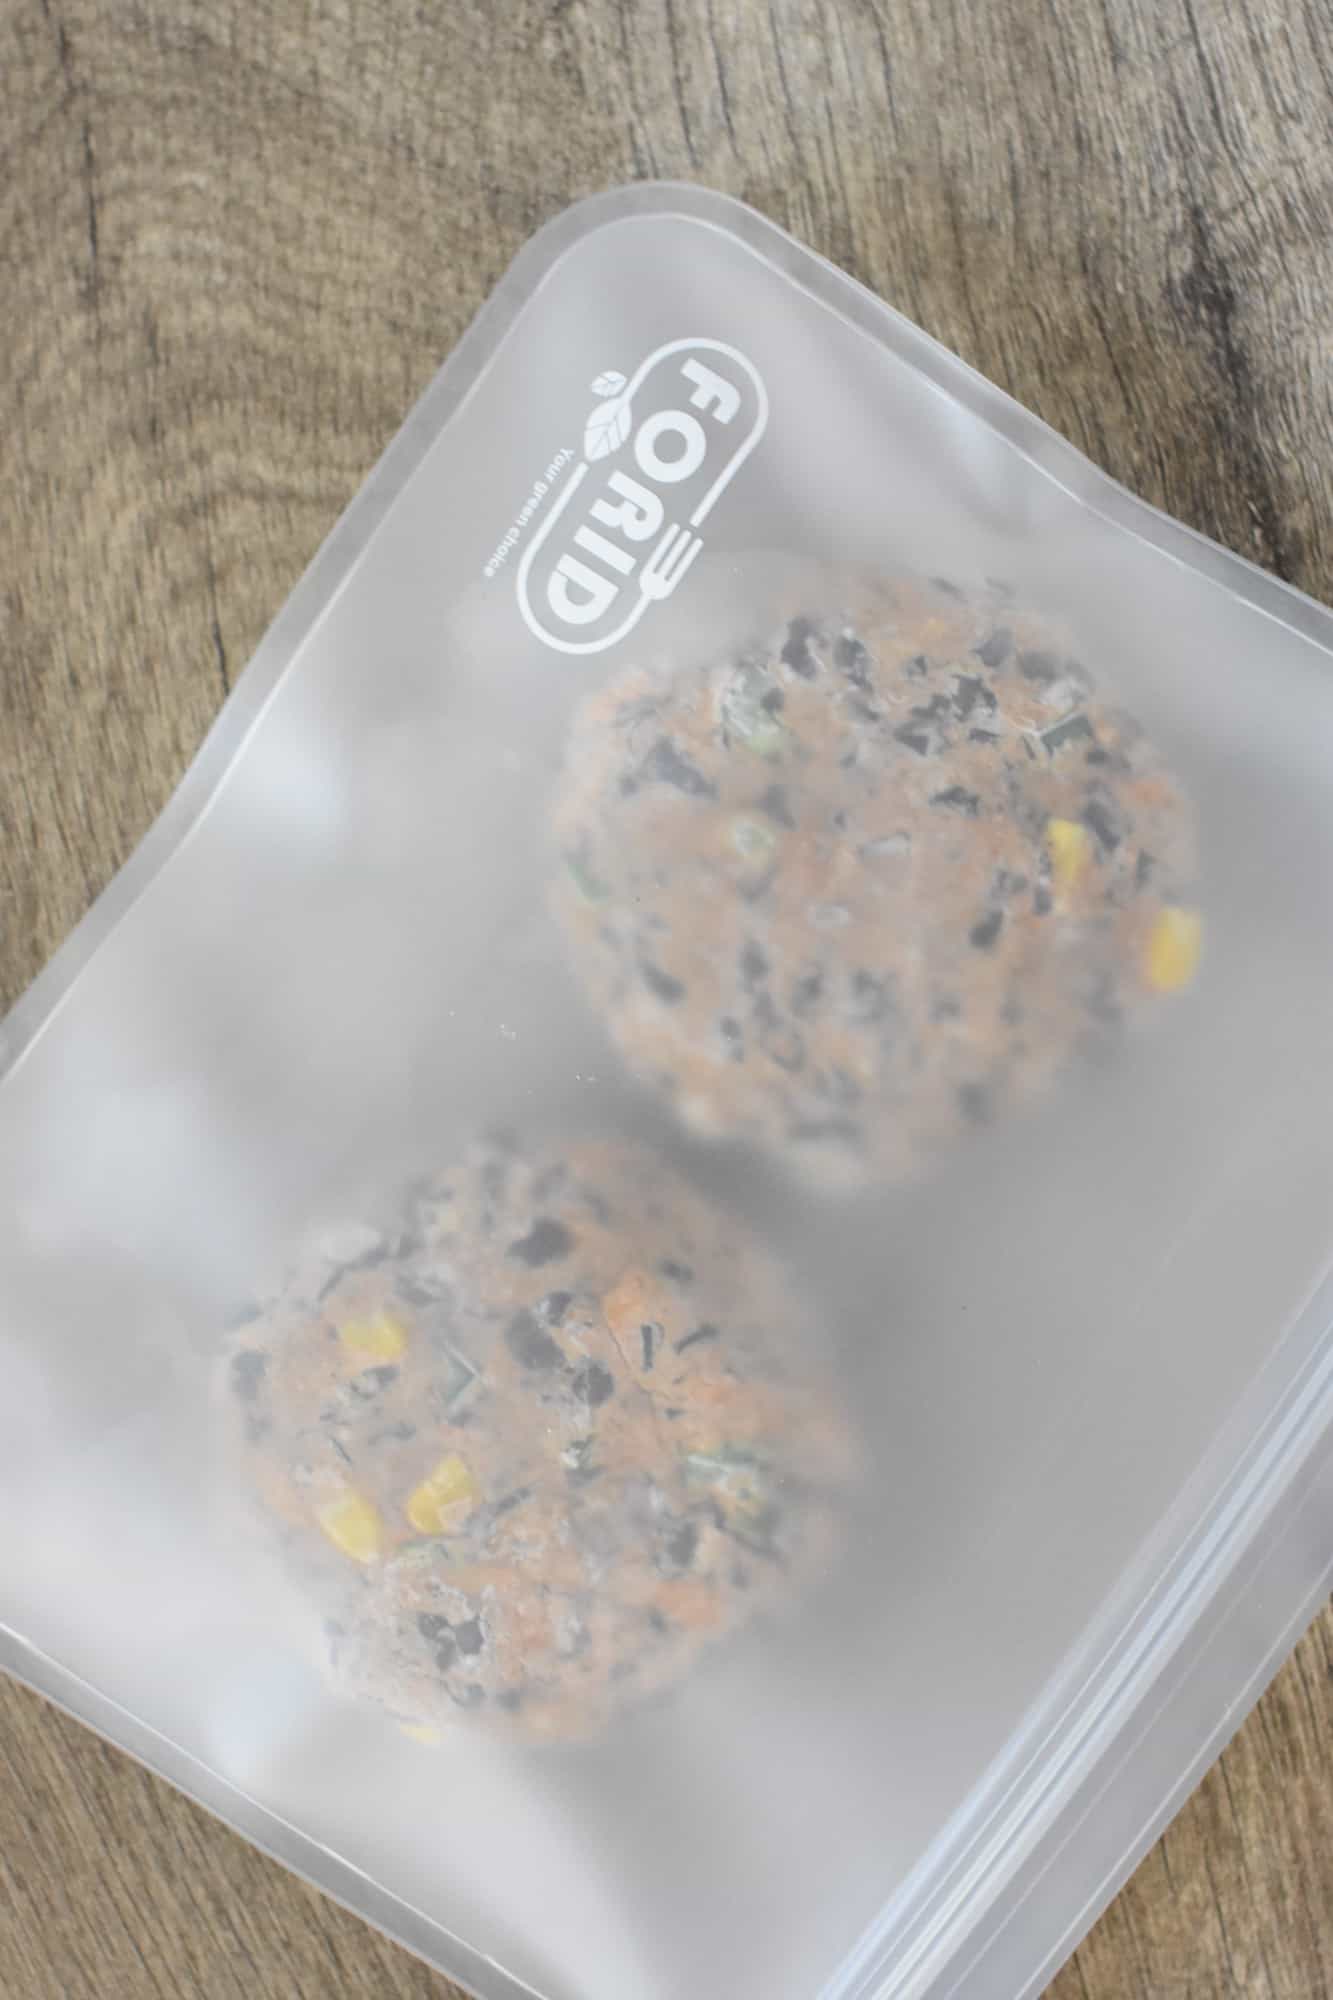 Formed frozen burger patties in a freezer bag for future use